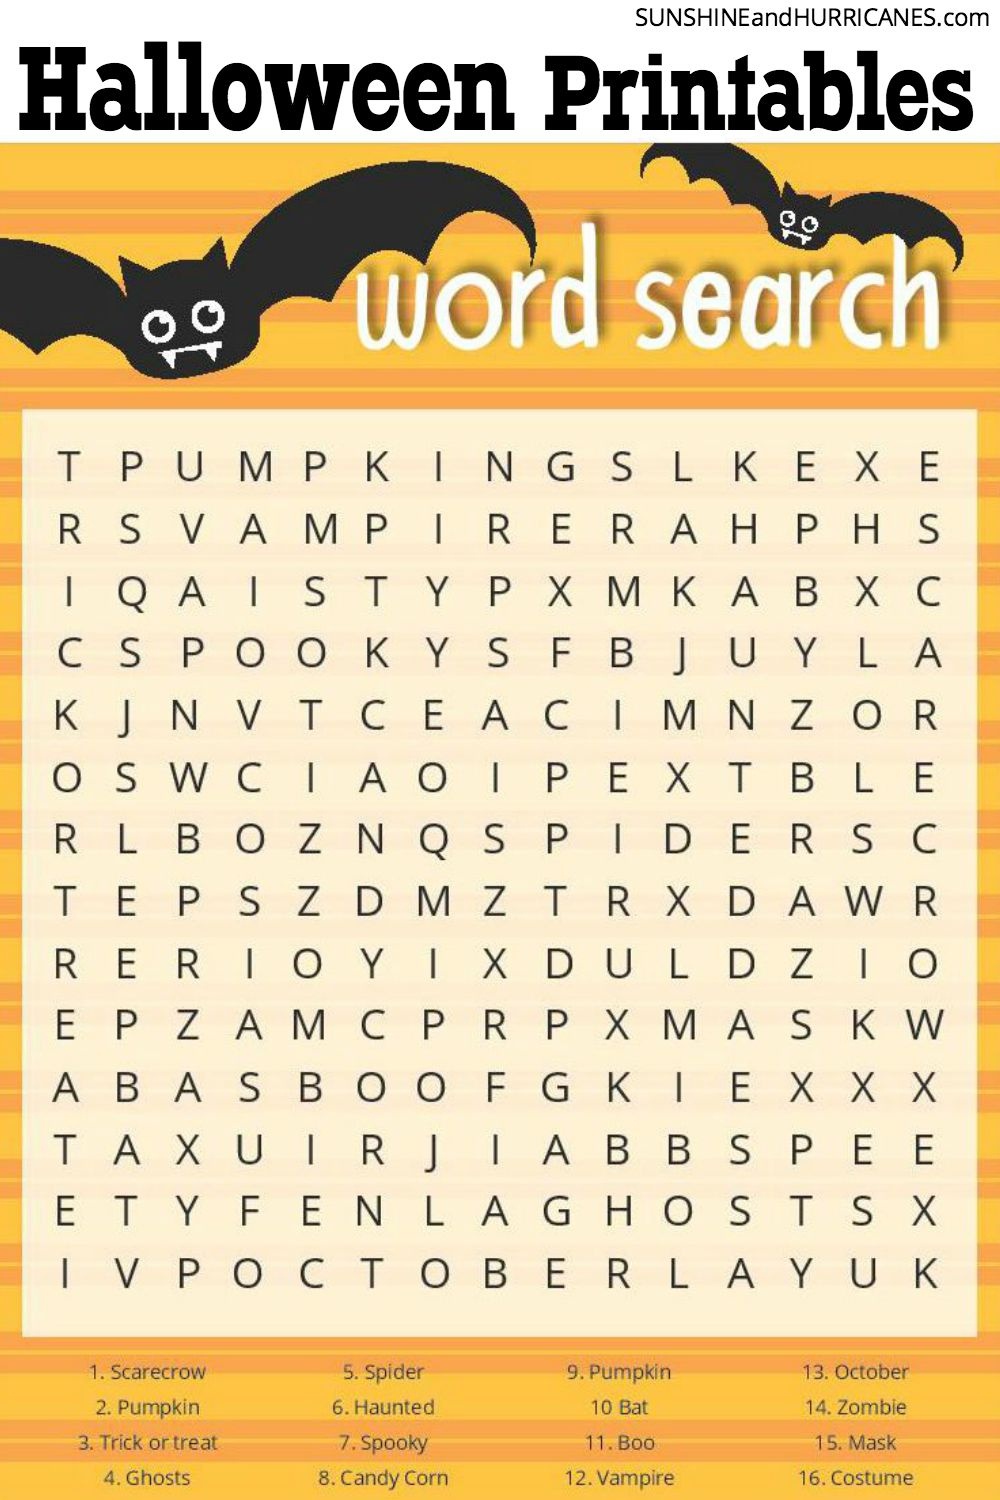 Halloween Games - Word Search - Free Printable Halloween Games For Kids